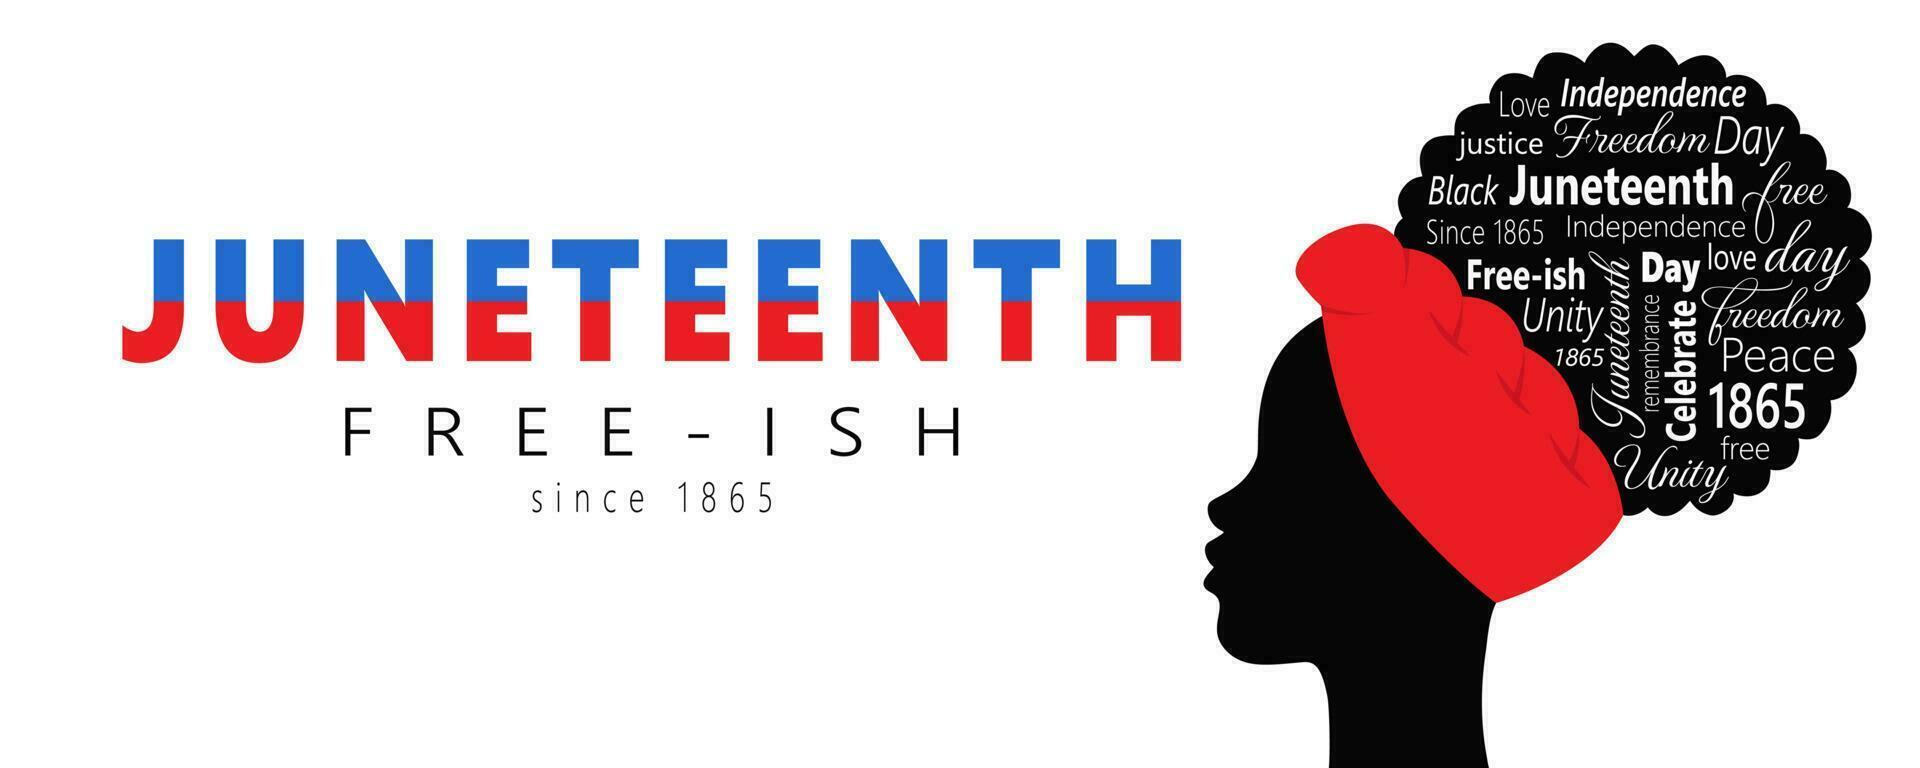 Juneteenth Horizontal Banner With Silhouette Of Woman And Words Symbolizing African American History And Heritage, National Independence Day. Free-ish since 1865. Vector illustration On A White